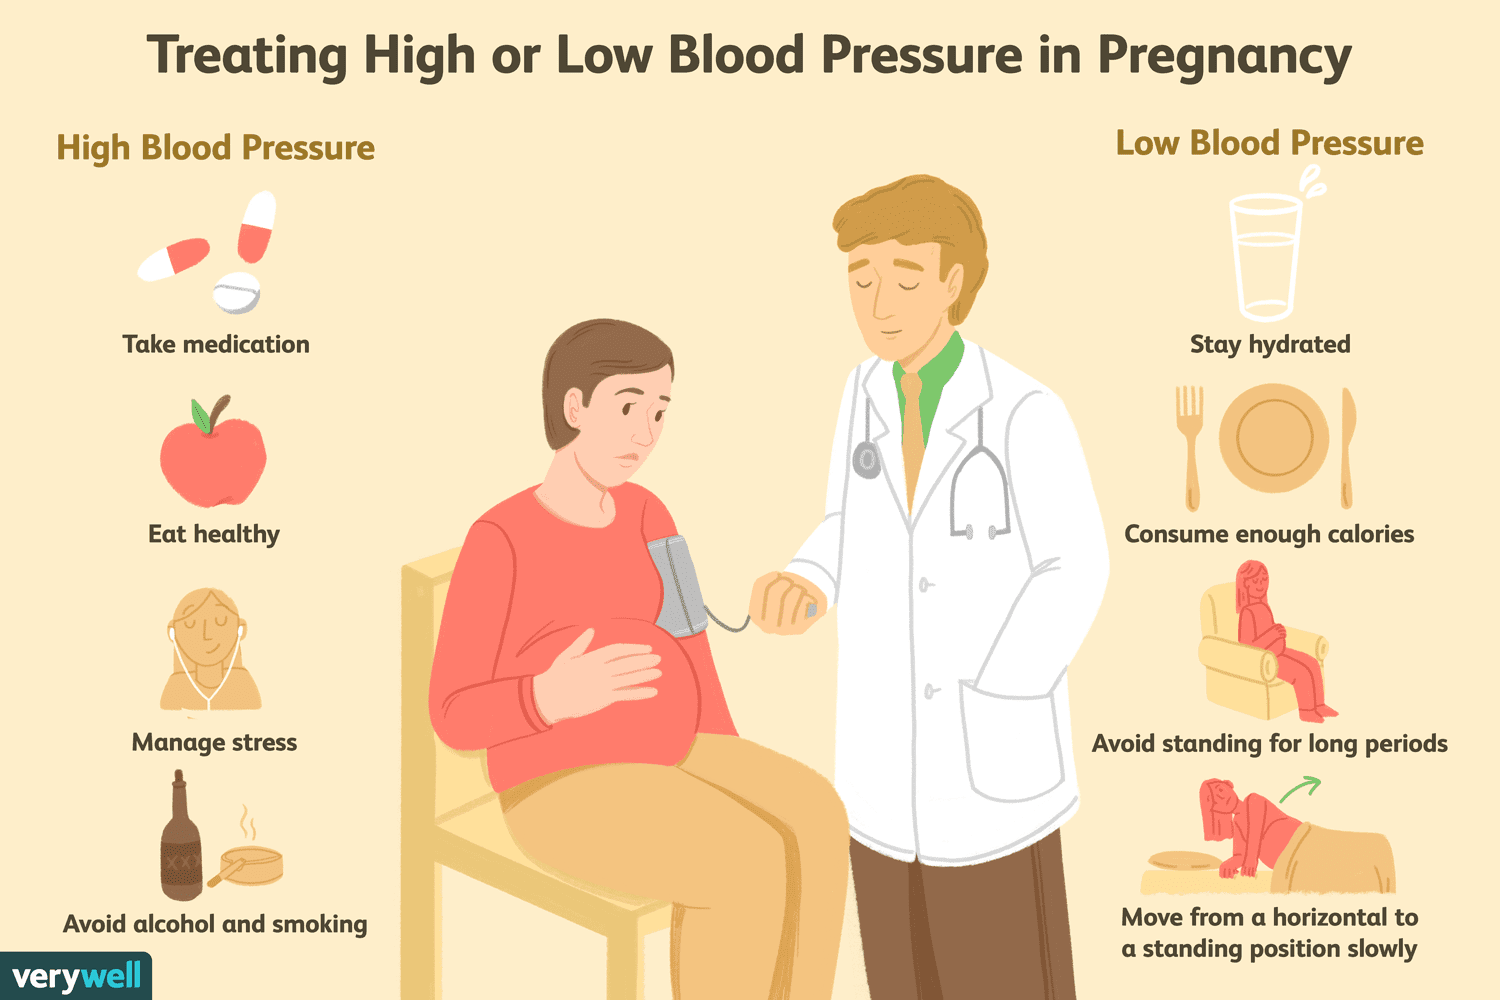 Blood Pressure in Pregnancy: How to Deal With It